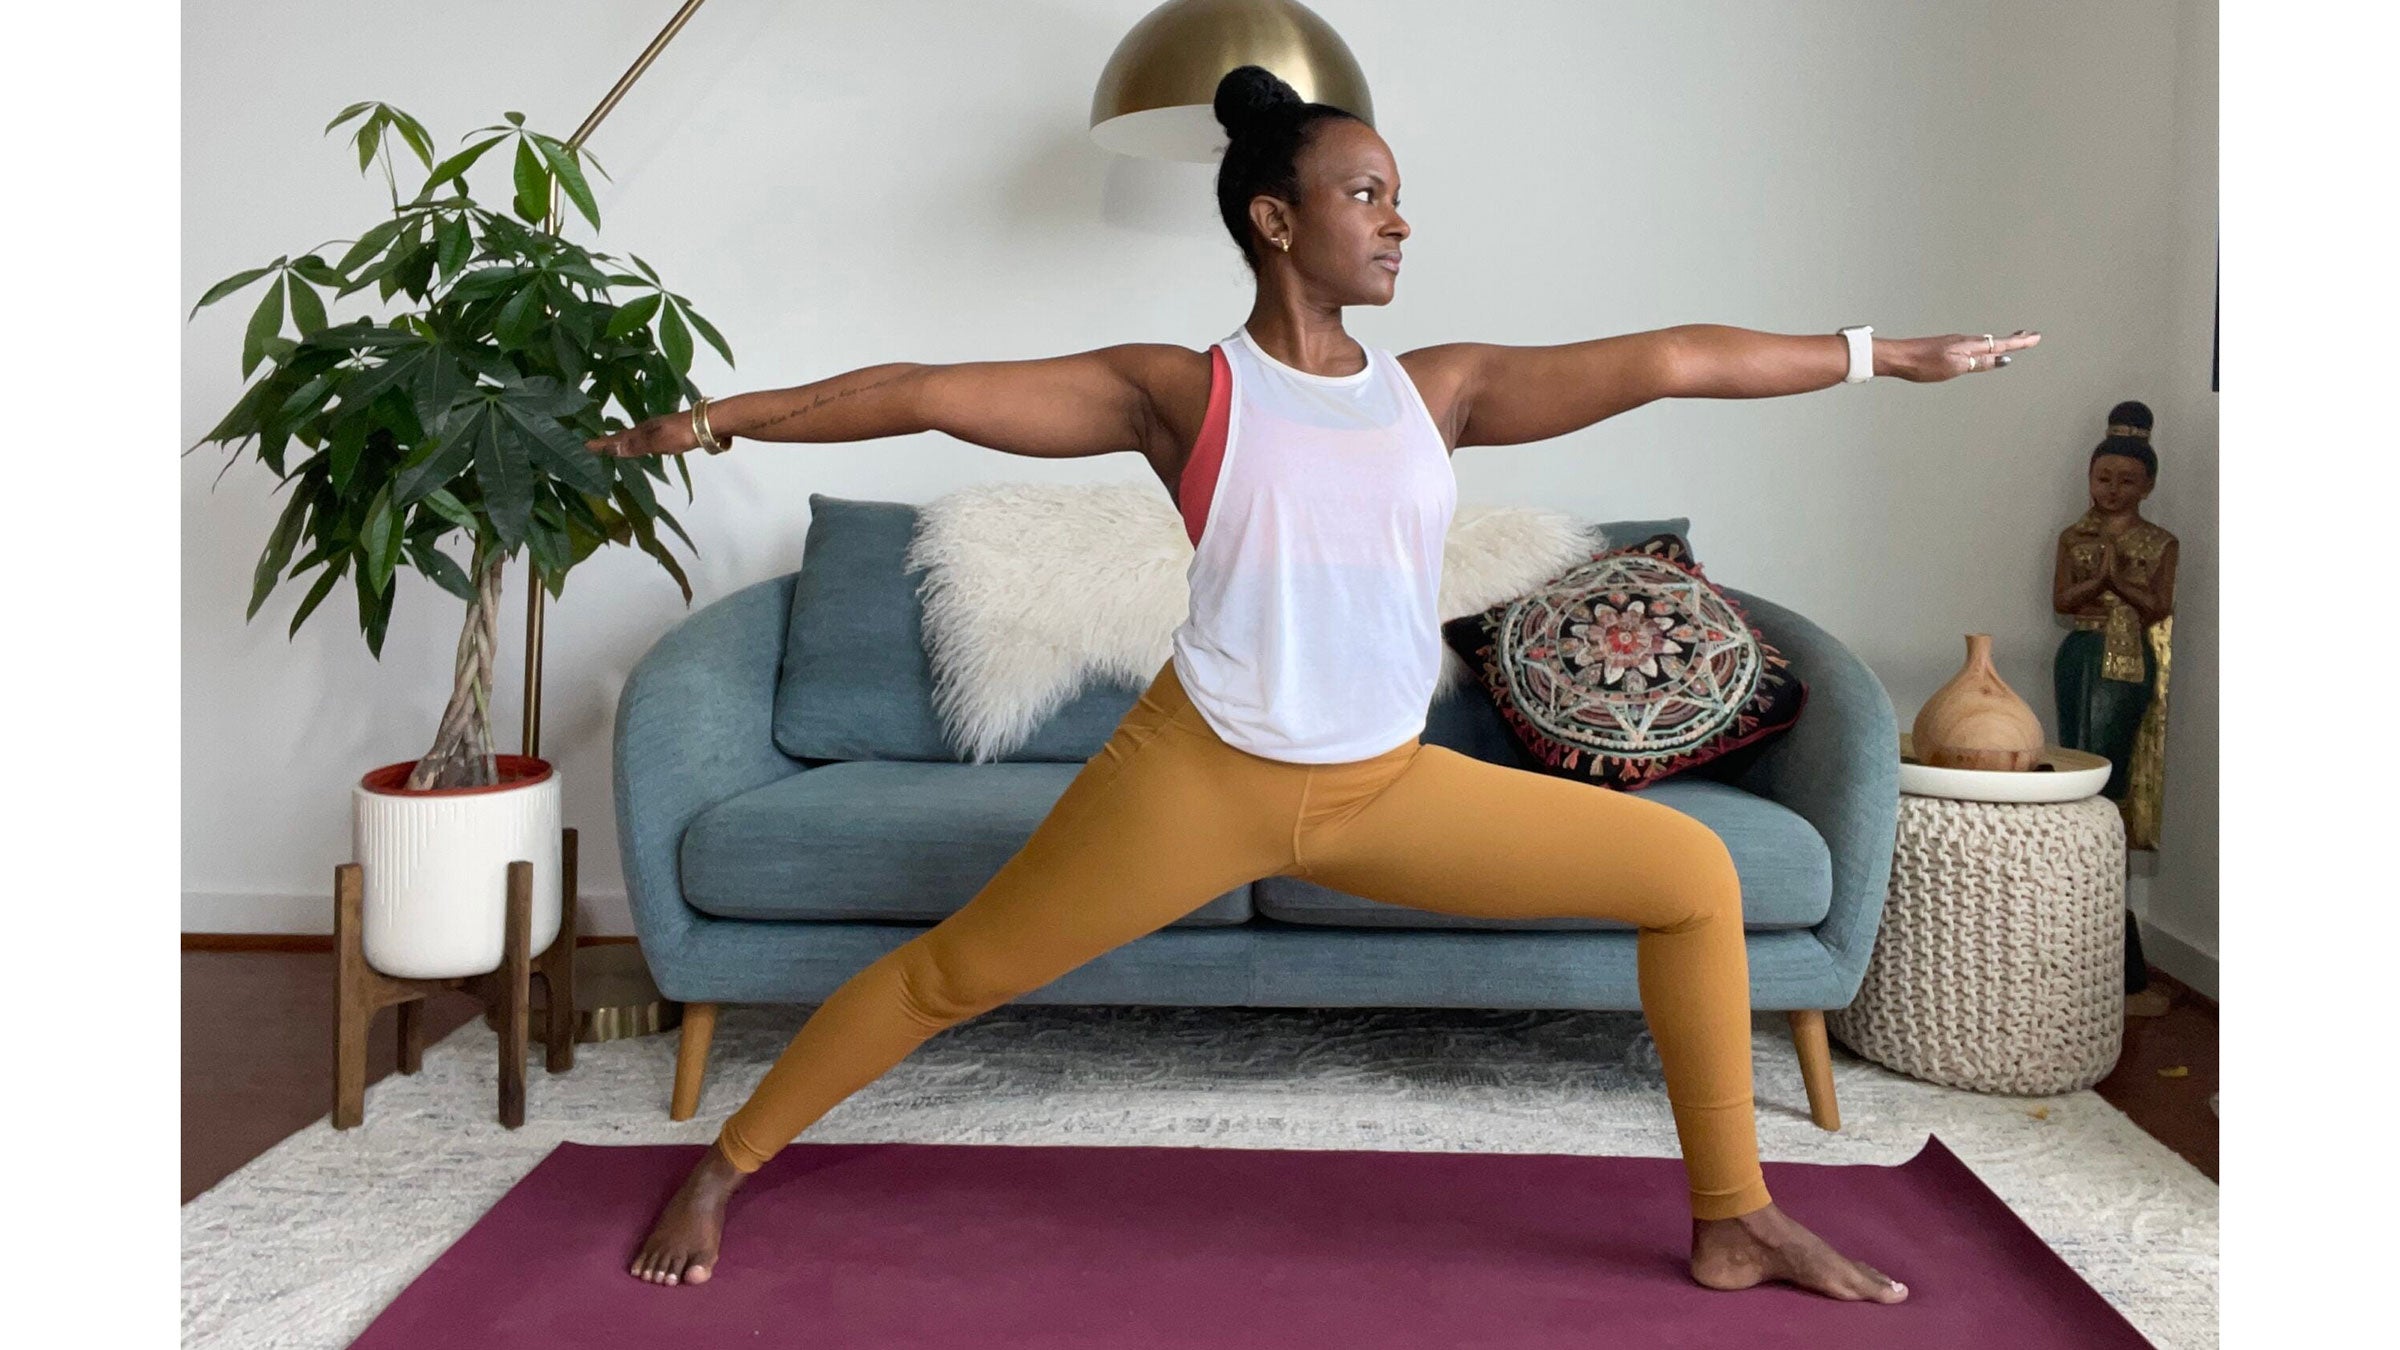 Sun Rock Yoga - Let's talk about the EKA Pada Galavasana pose or the flying  pigeon pose. This pose is good for strengthening the abdominal muscles to  help lift and balance the